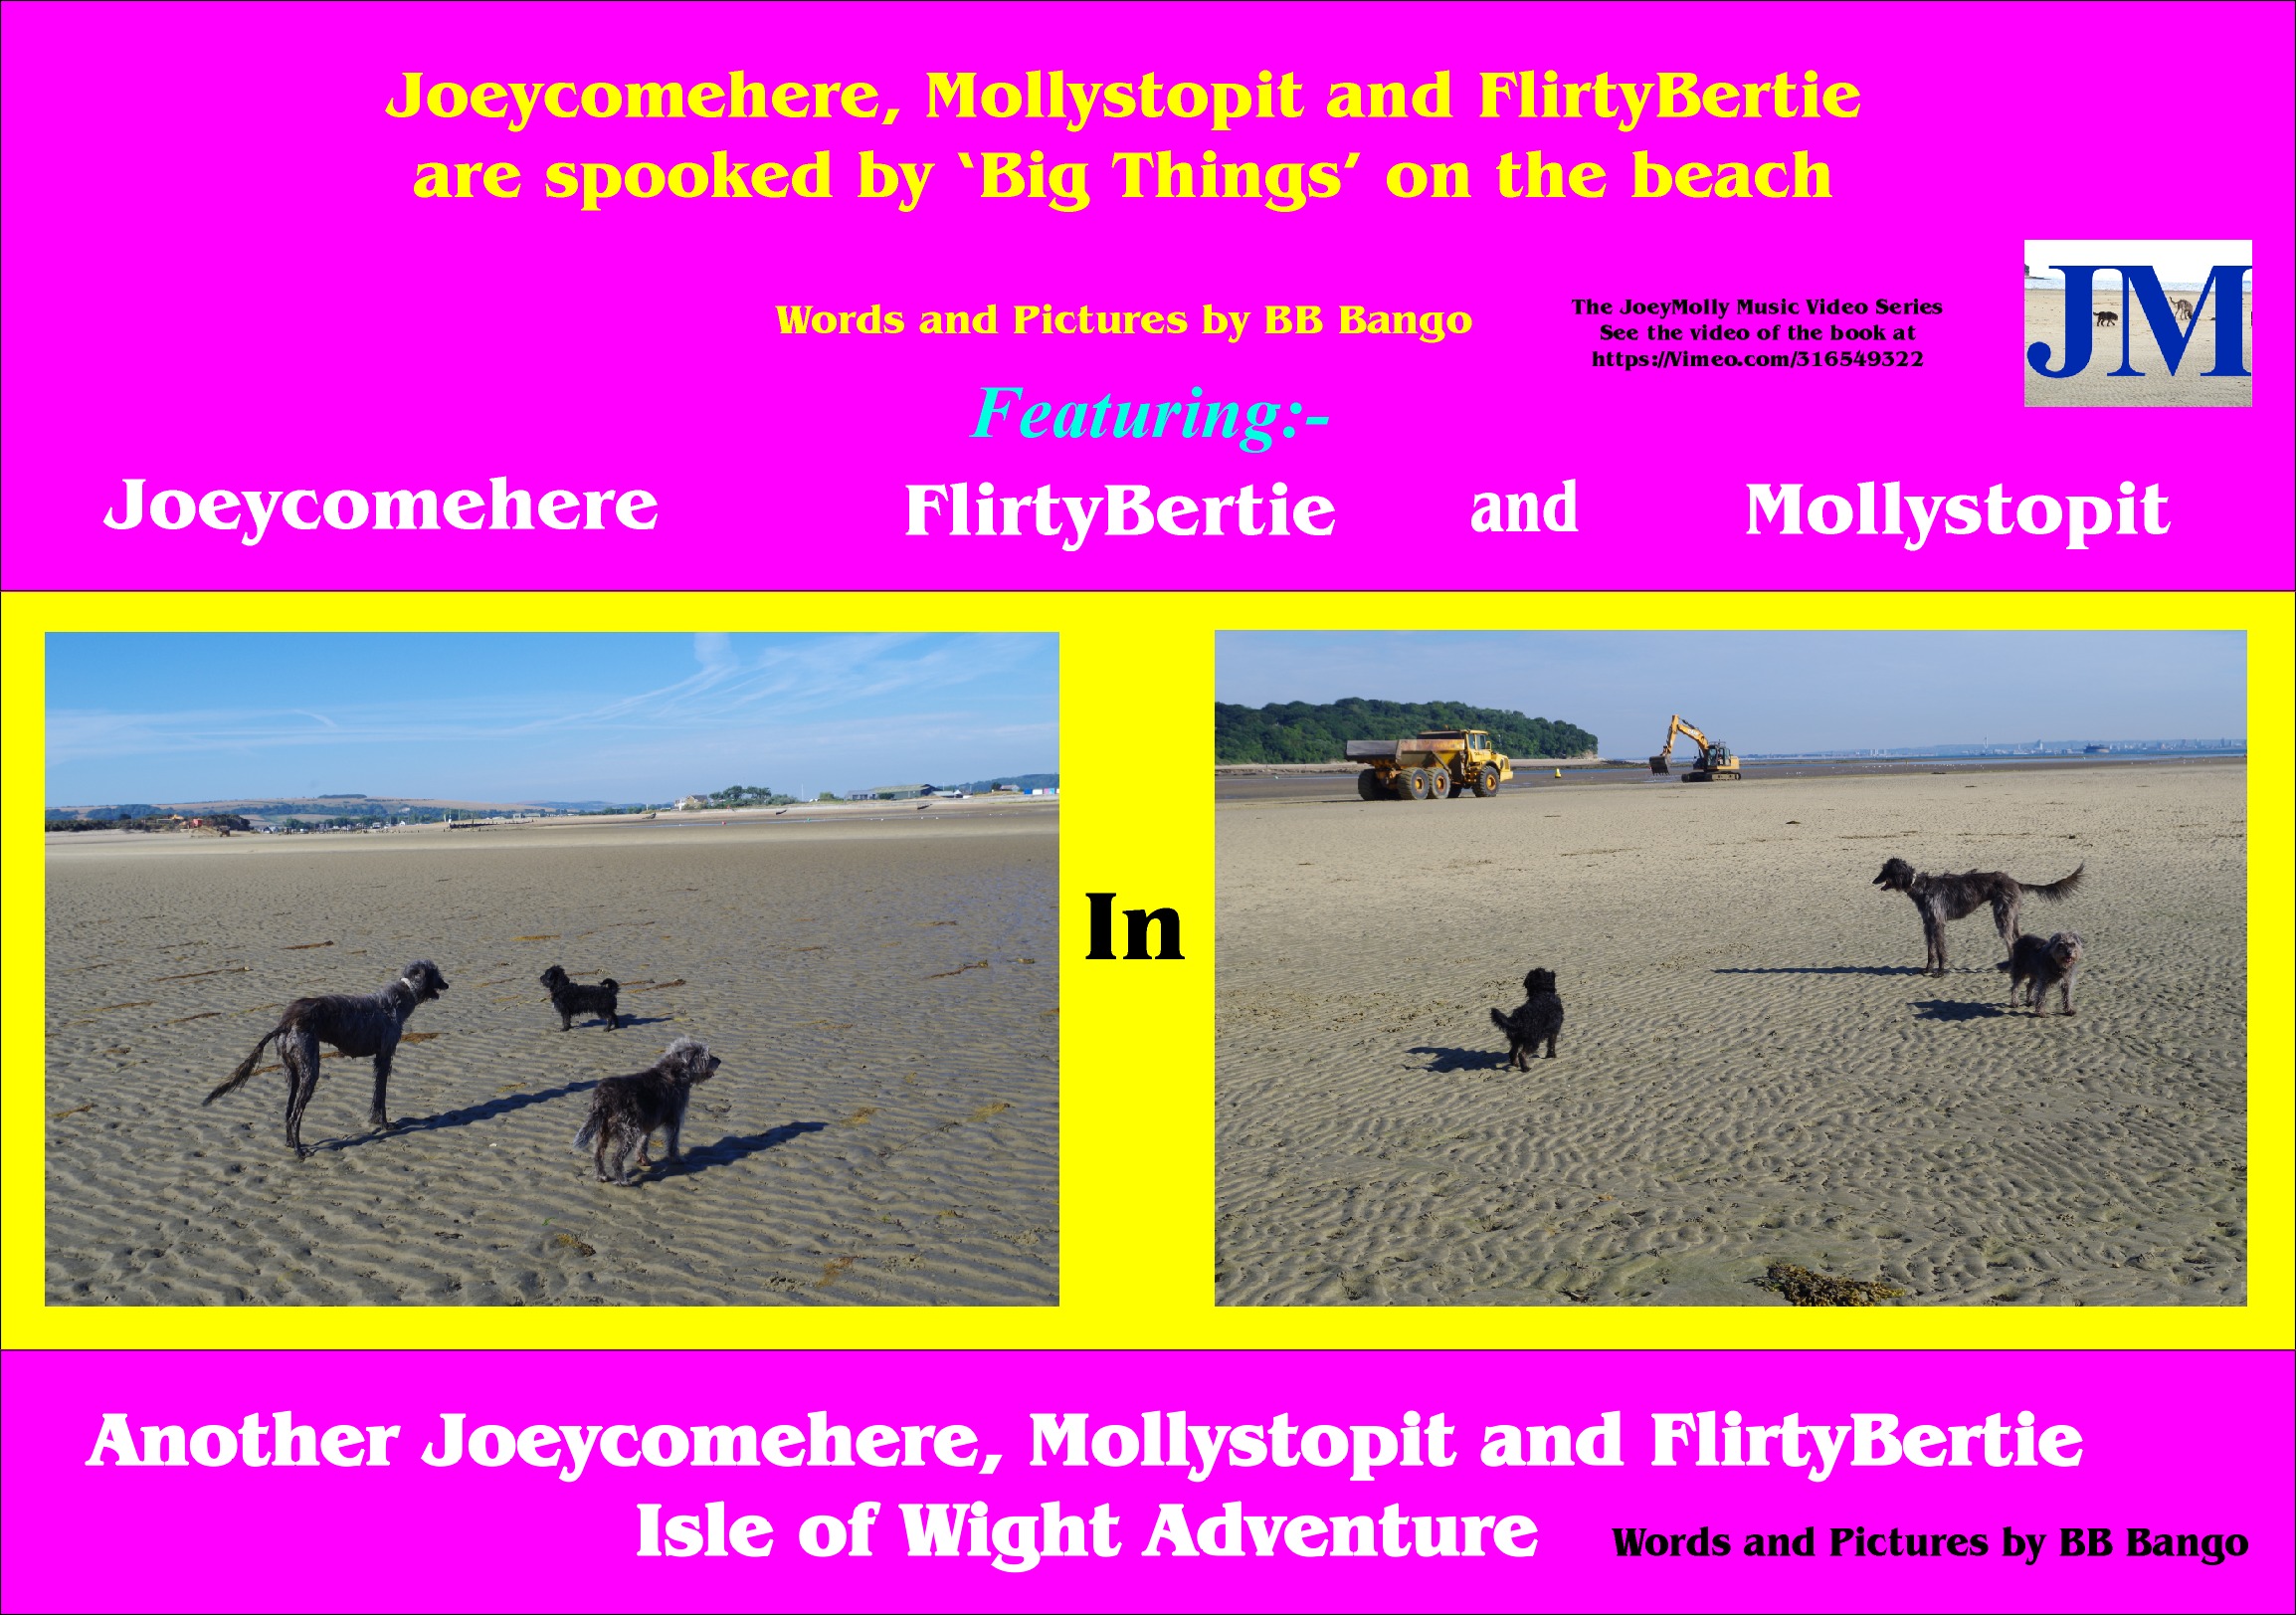 Now available on Kindle. Joeycomehere, Mollystopit and now FlirtyBertie get spookend by big things on the beach. Part of a series of Wight Adventures written by BB Bango and published by ClayClay. Copies of book in  A5 format available direct from the ClayClay Shop  This 4th book  is also a music video on vimeo.com. see link on front cover of book